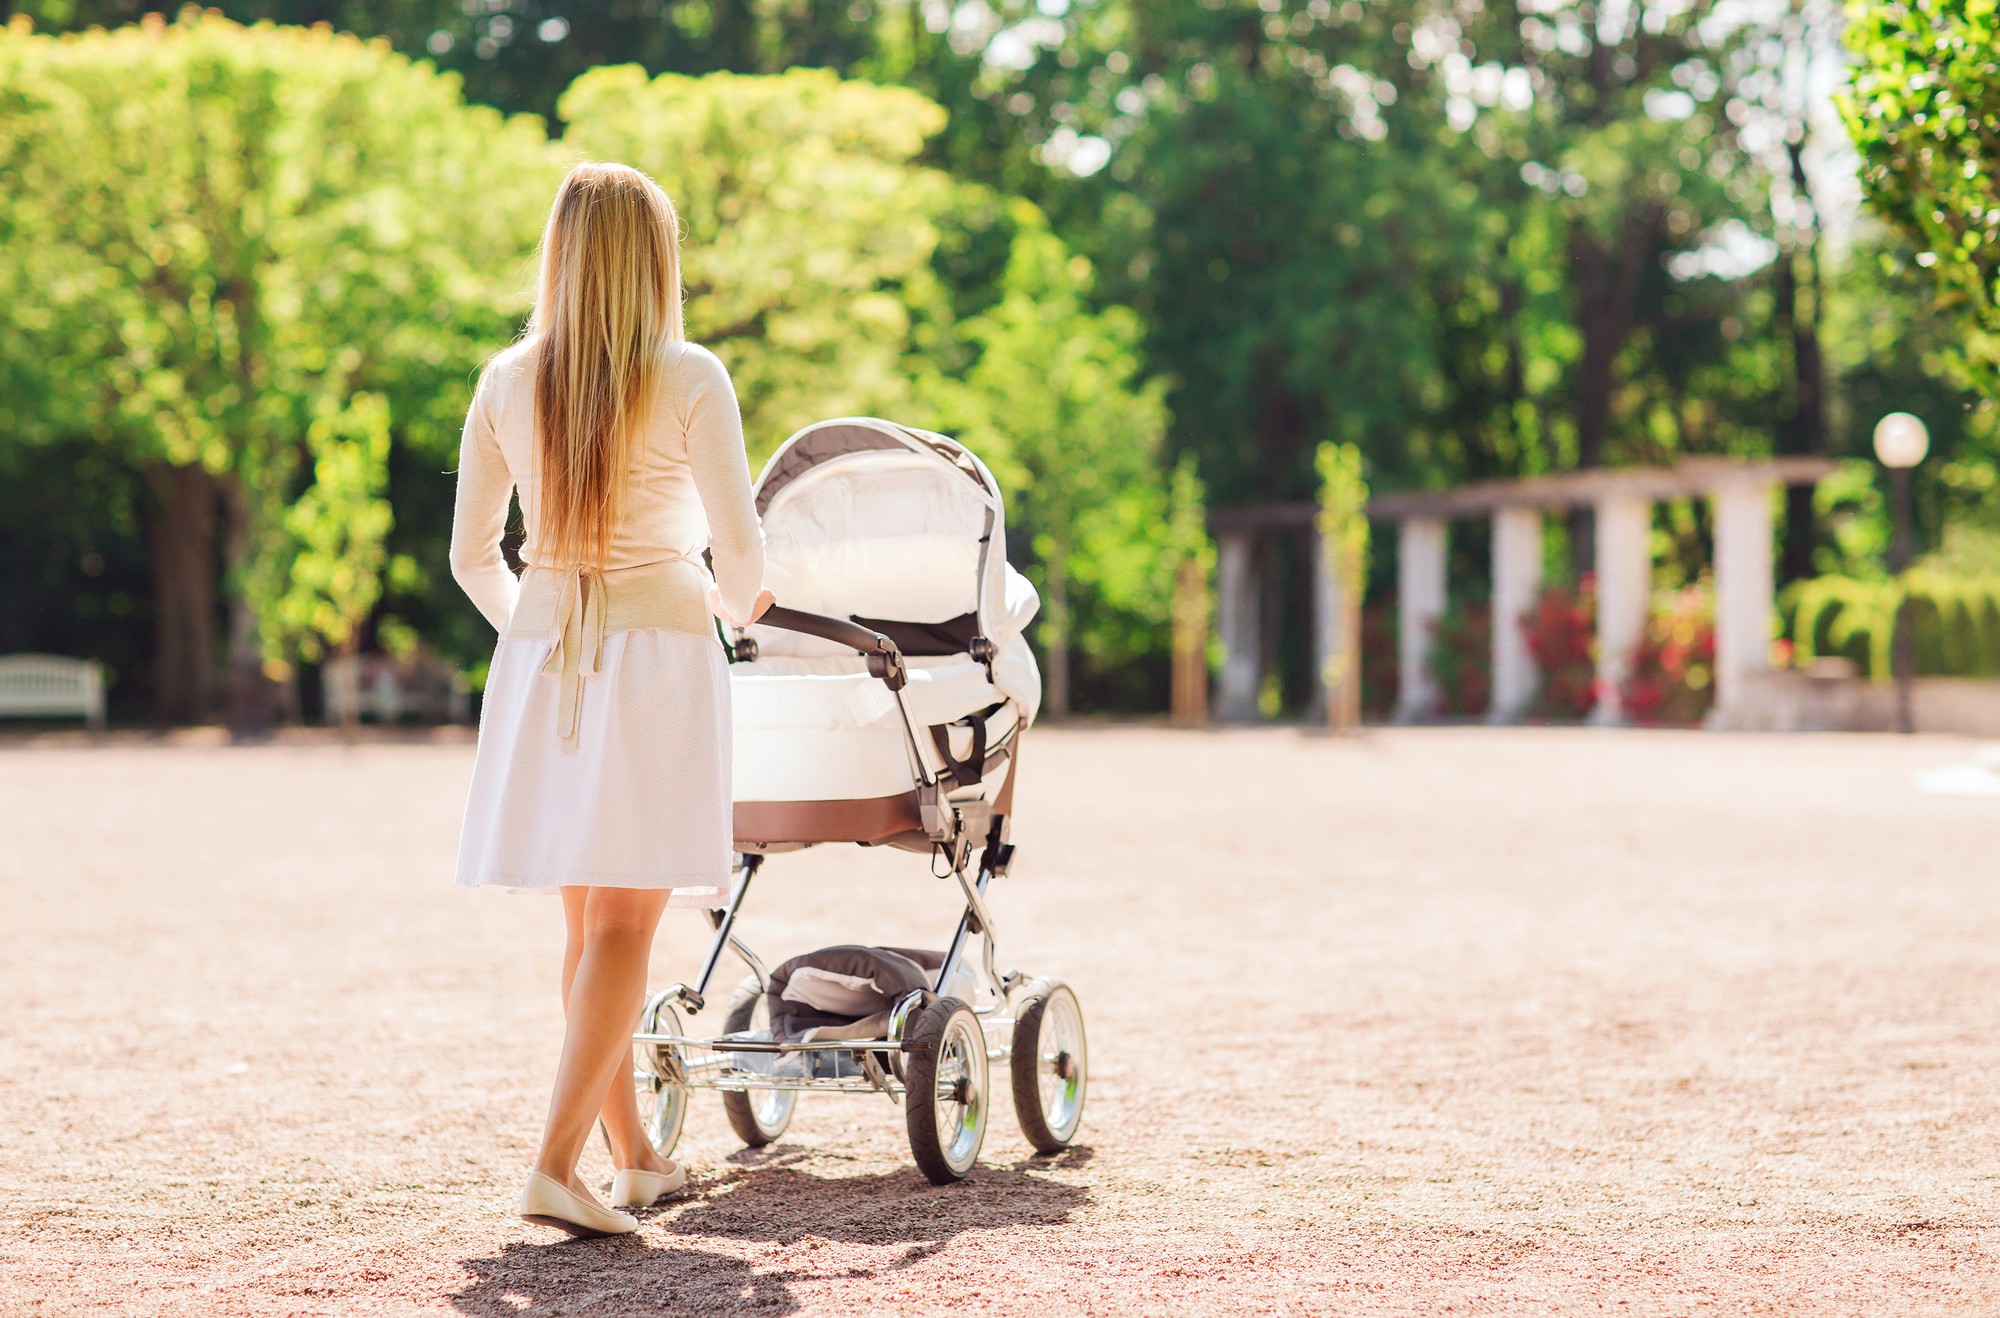 Top 5 Tips for a Stress-Free Outing with Your Newborn